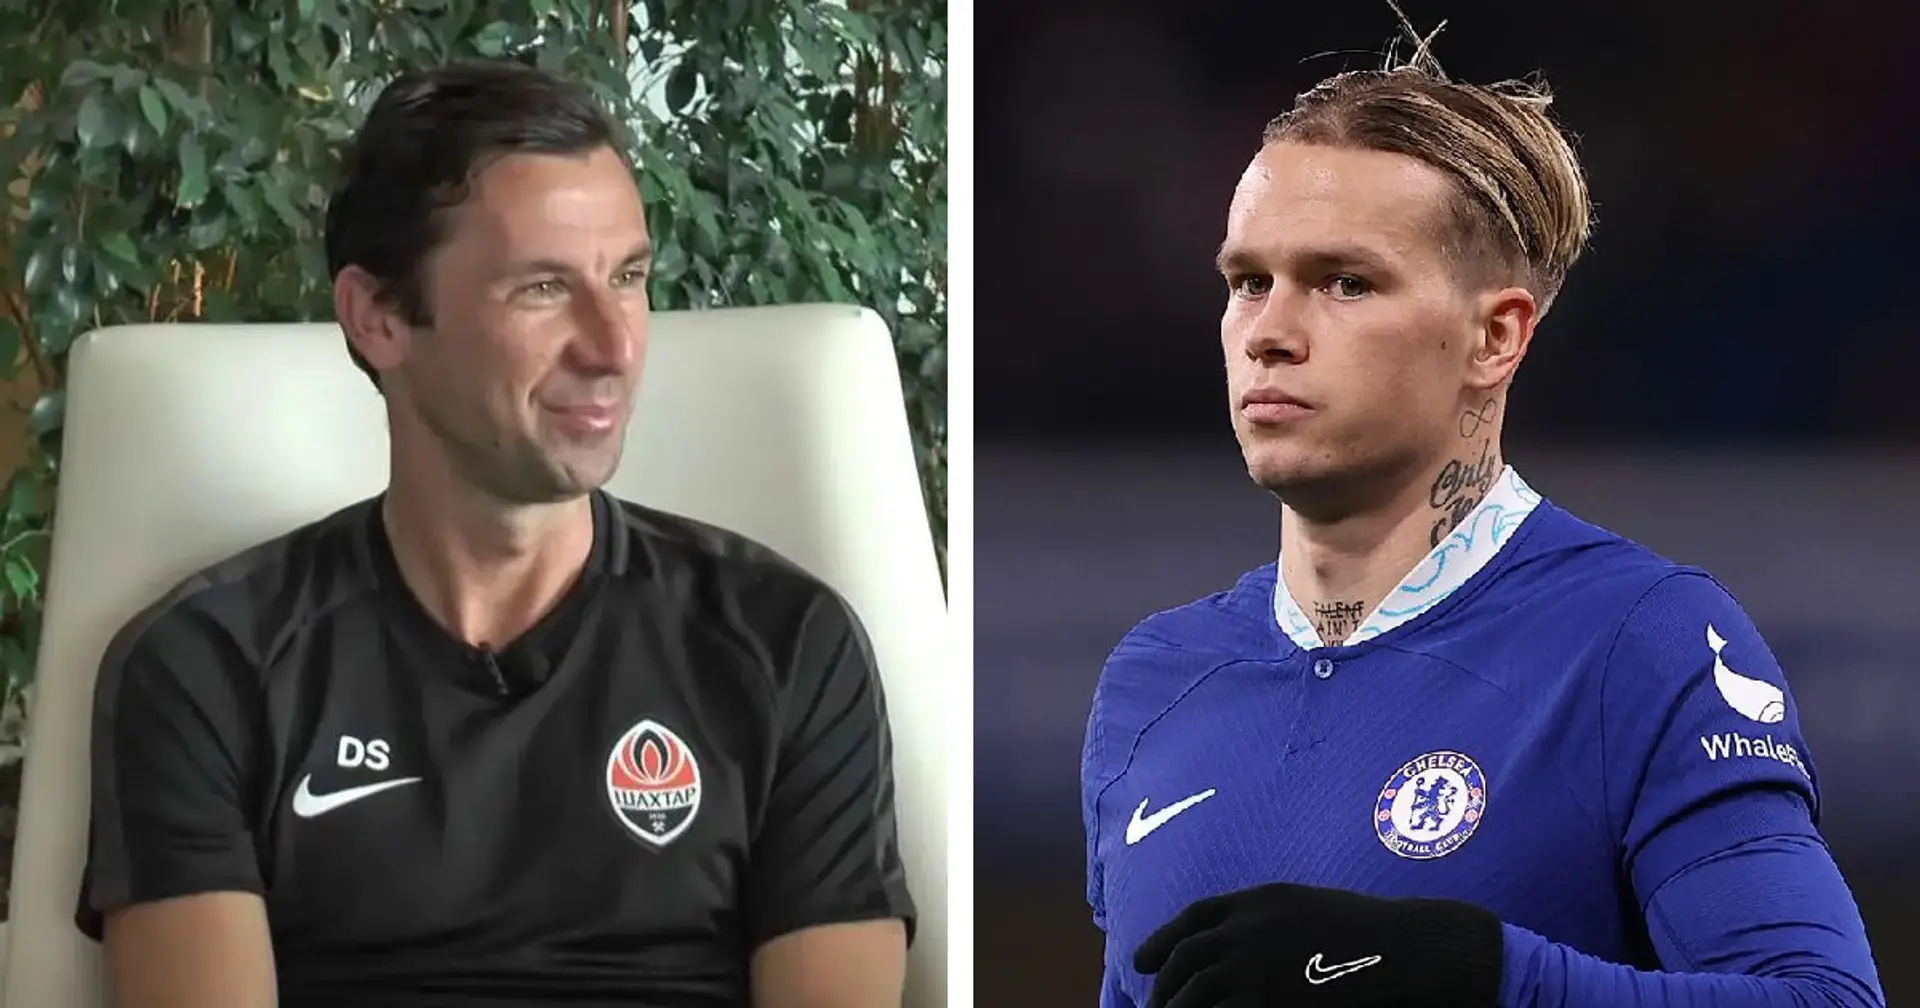 'This is 35% of Mykhailo': Shakhtar director tells Chelsea fans to not worry about Mudryk